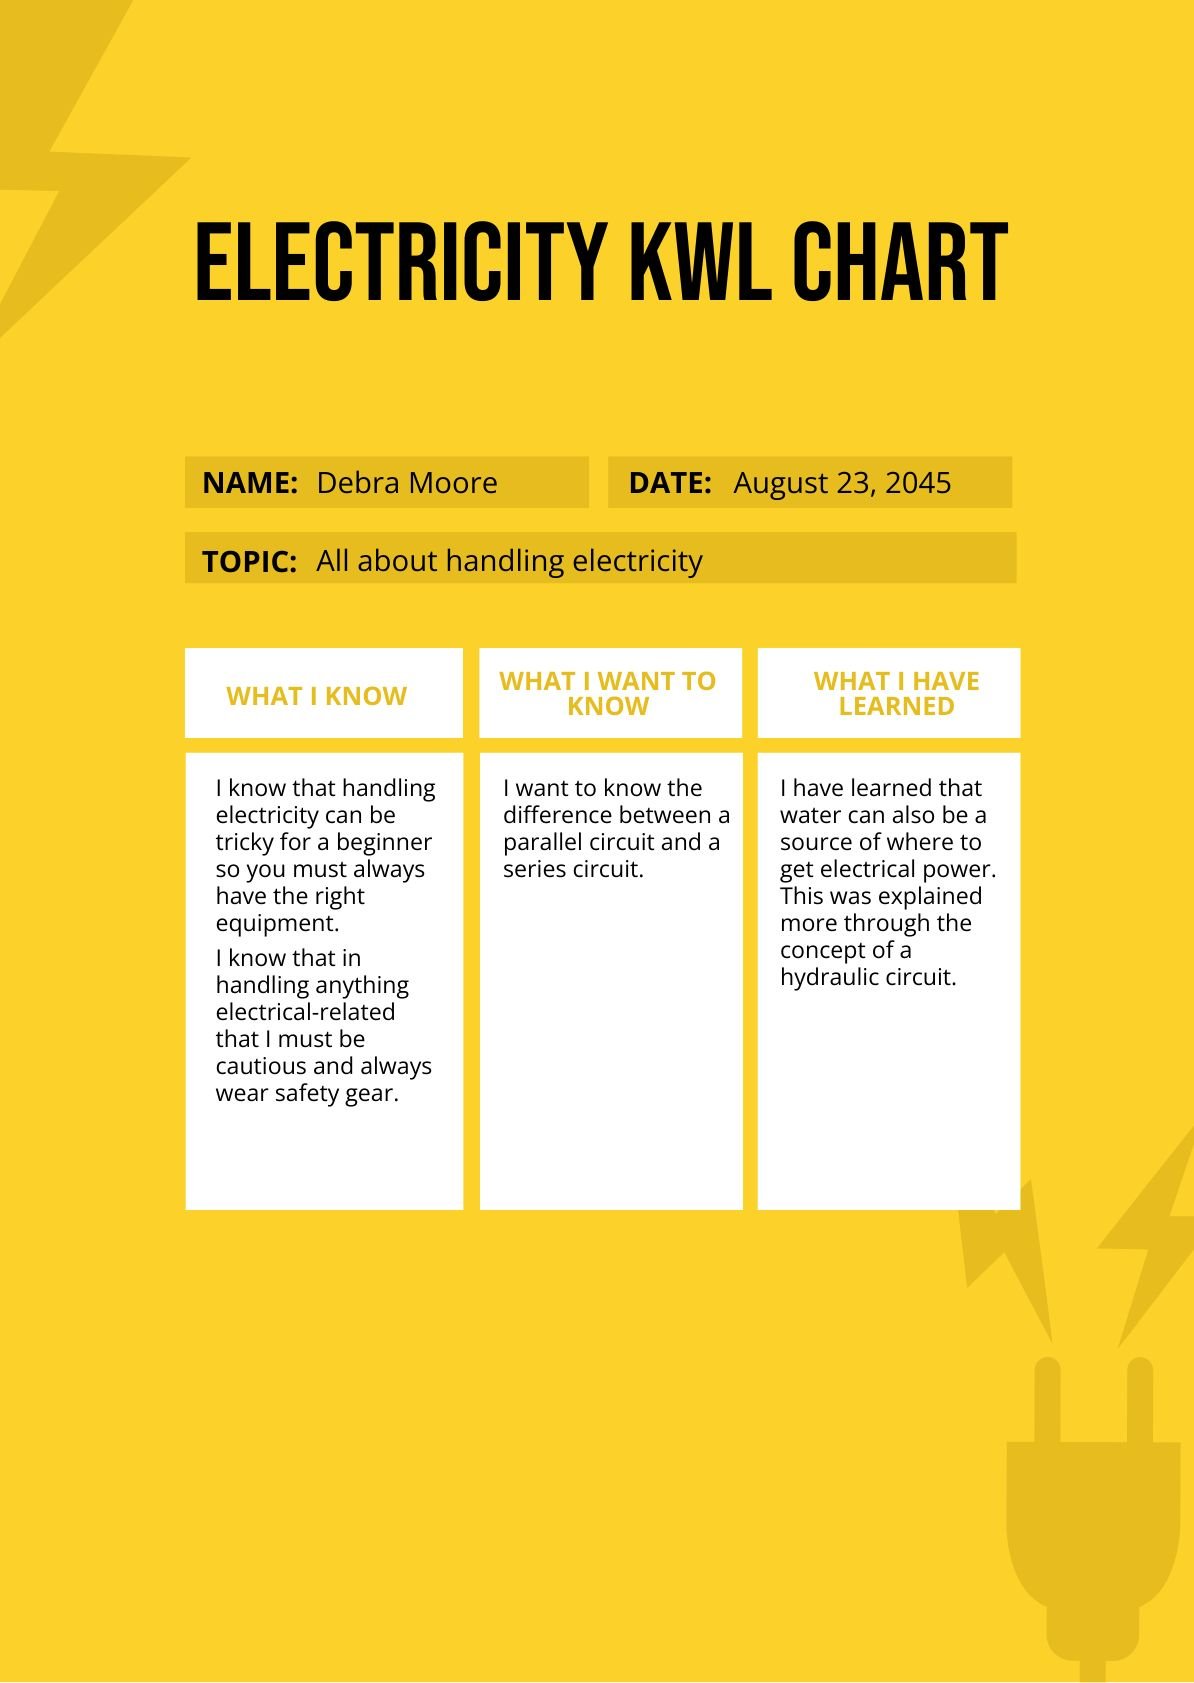 Electricity KWL Chart in PDF